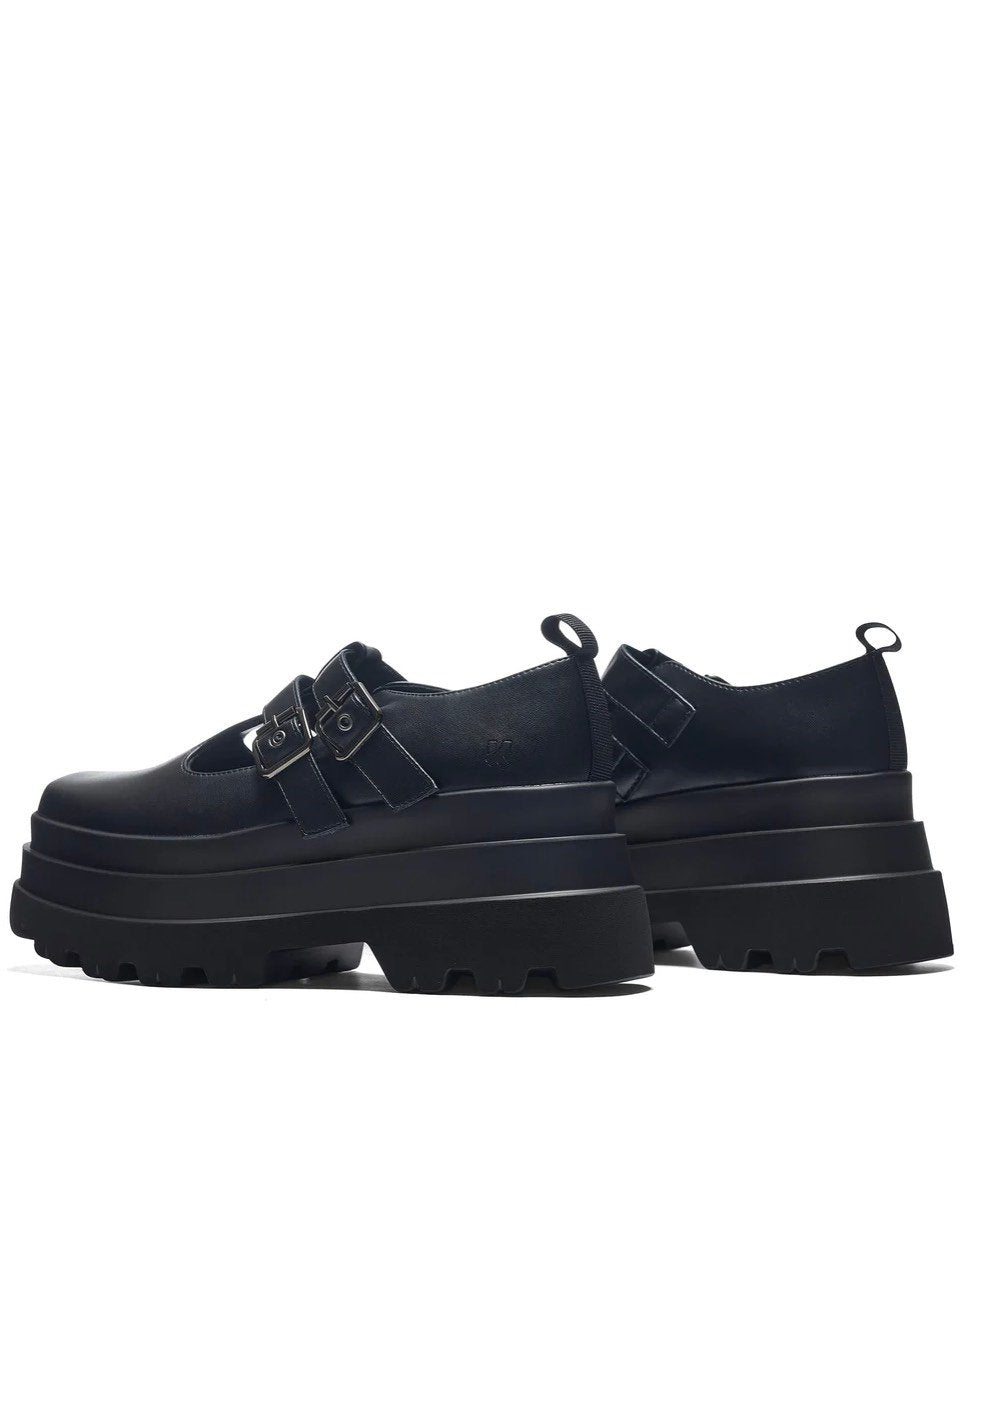 Koi Footwear - The Conquest Trident Mary Janes Black - Girl Shoes